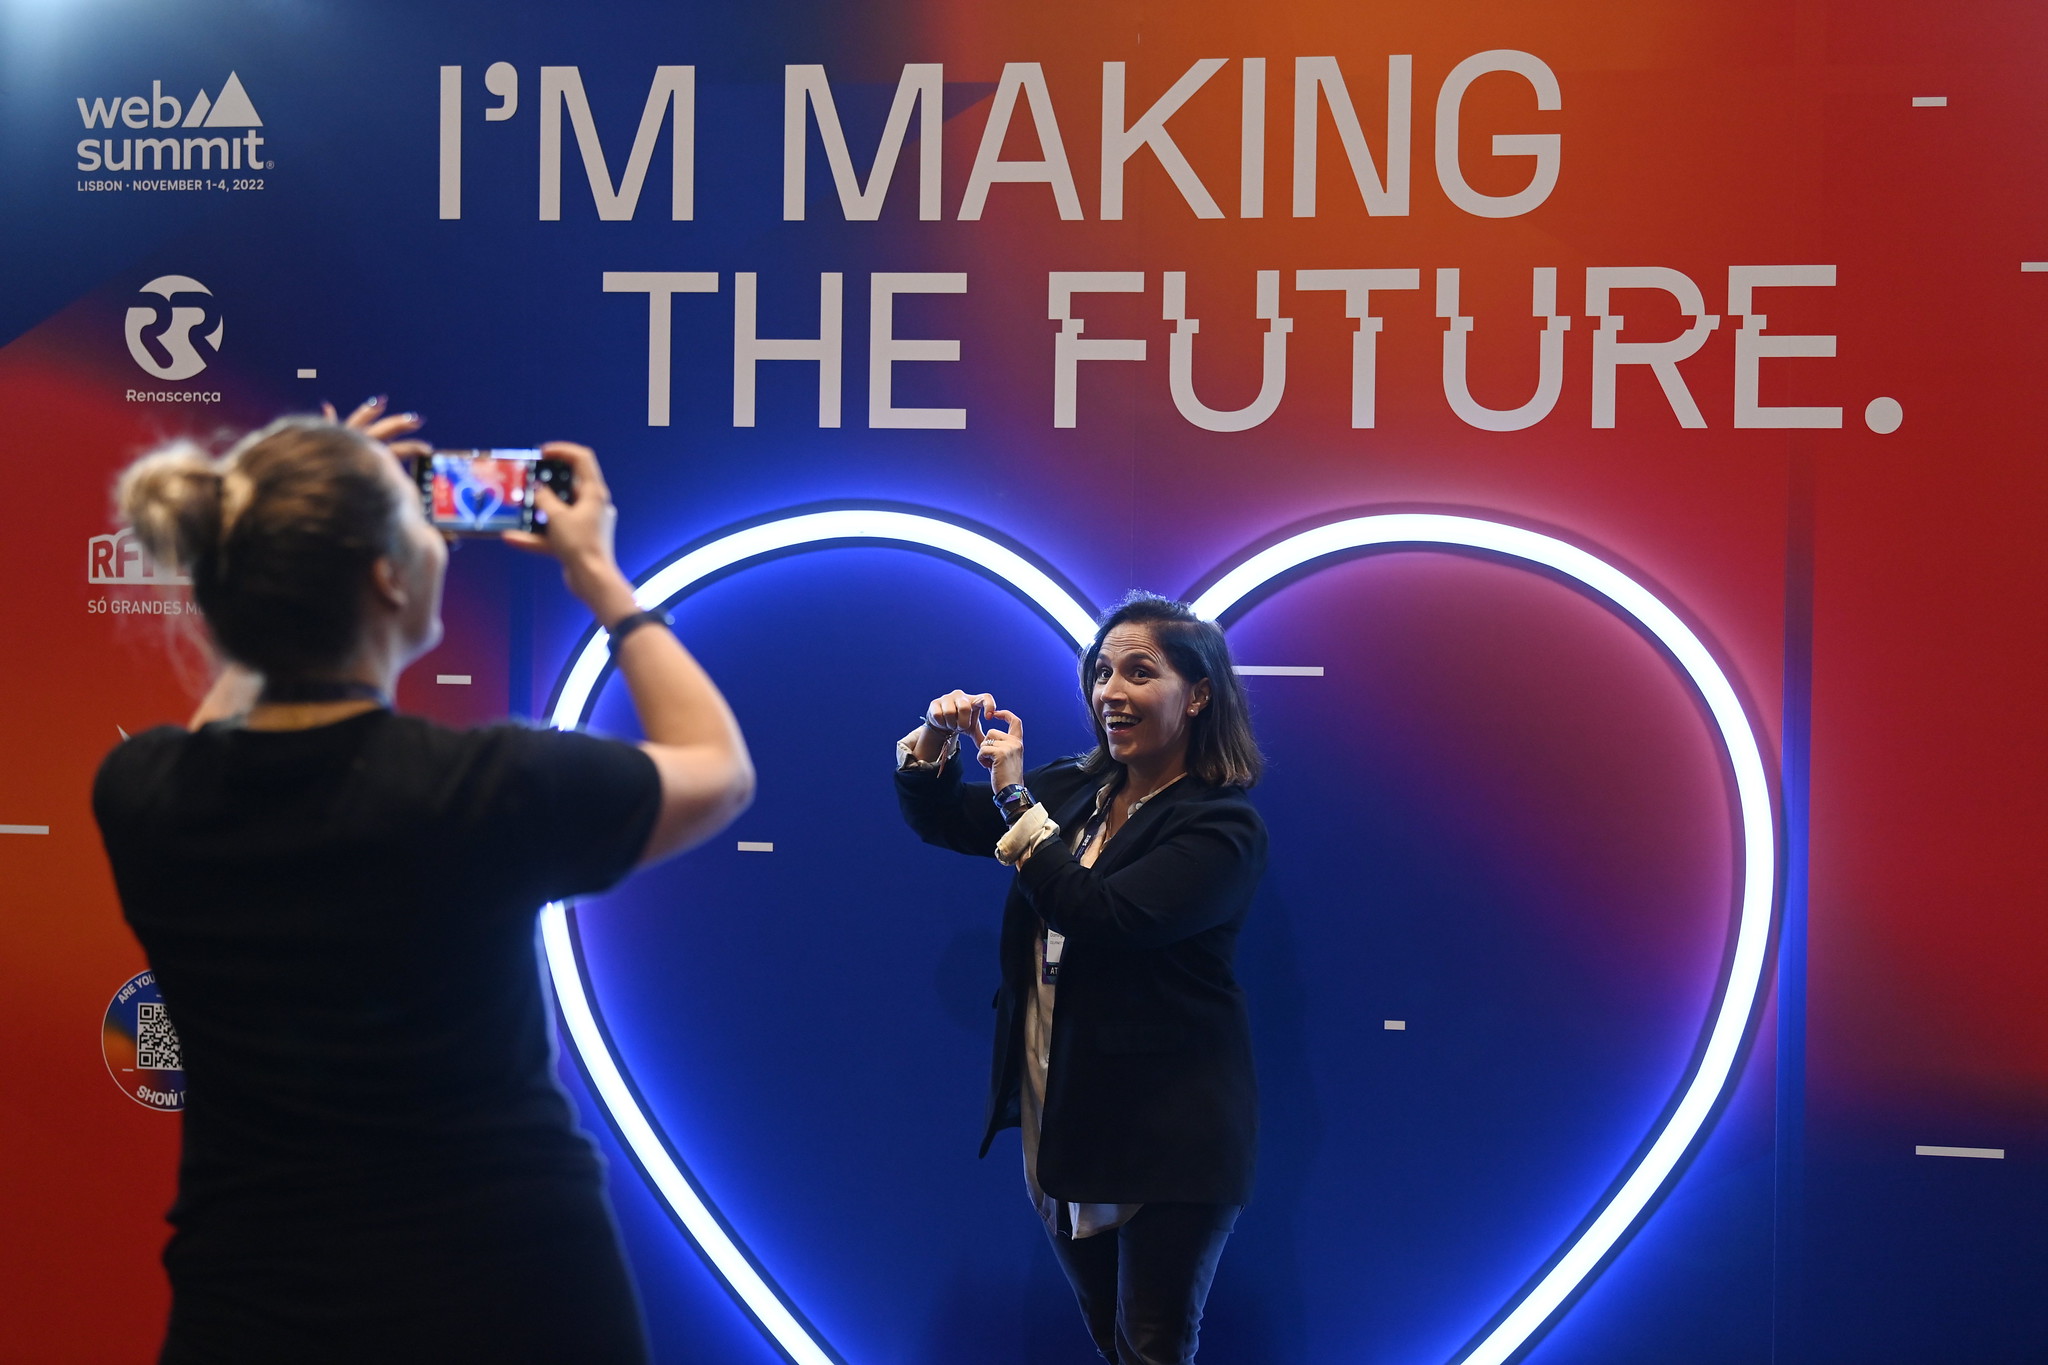 A person makes a heart shape with their hands in front of a wall with text that reads 'I'm making the future'. Another person, whose back is to the camera, is taking a photo using a smartphone.